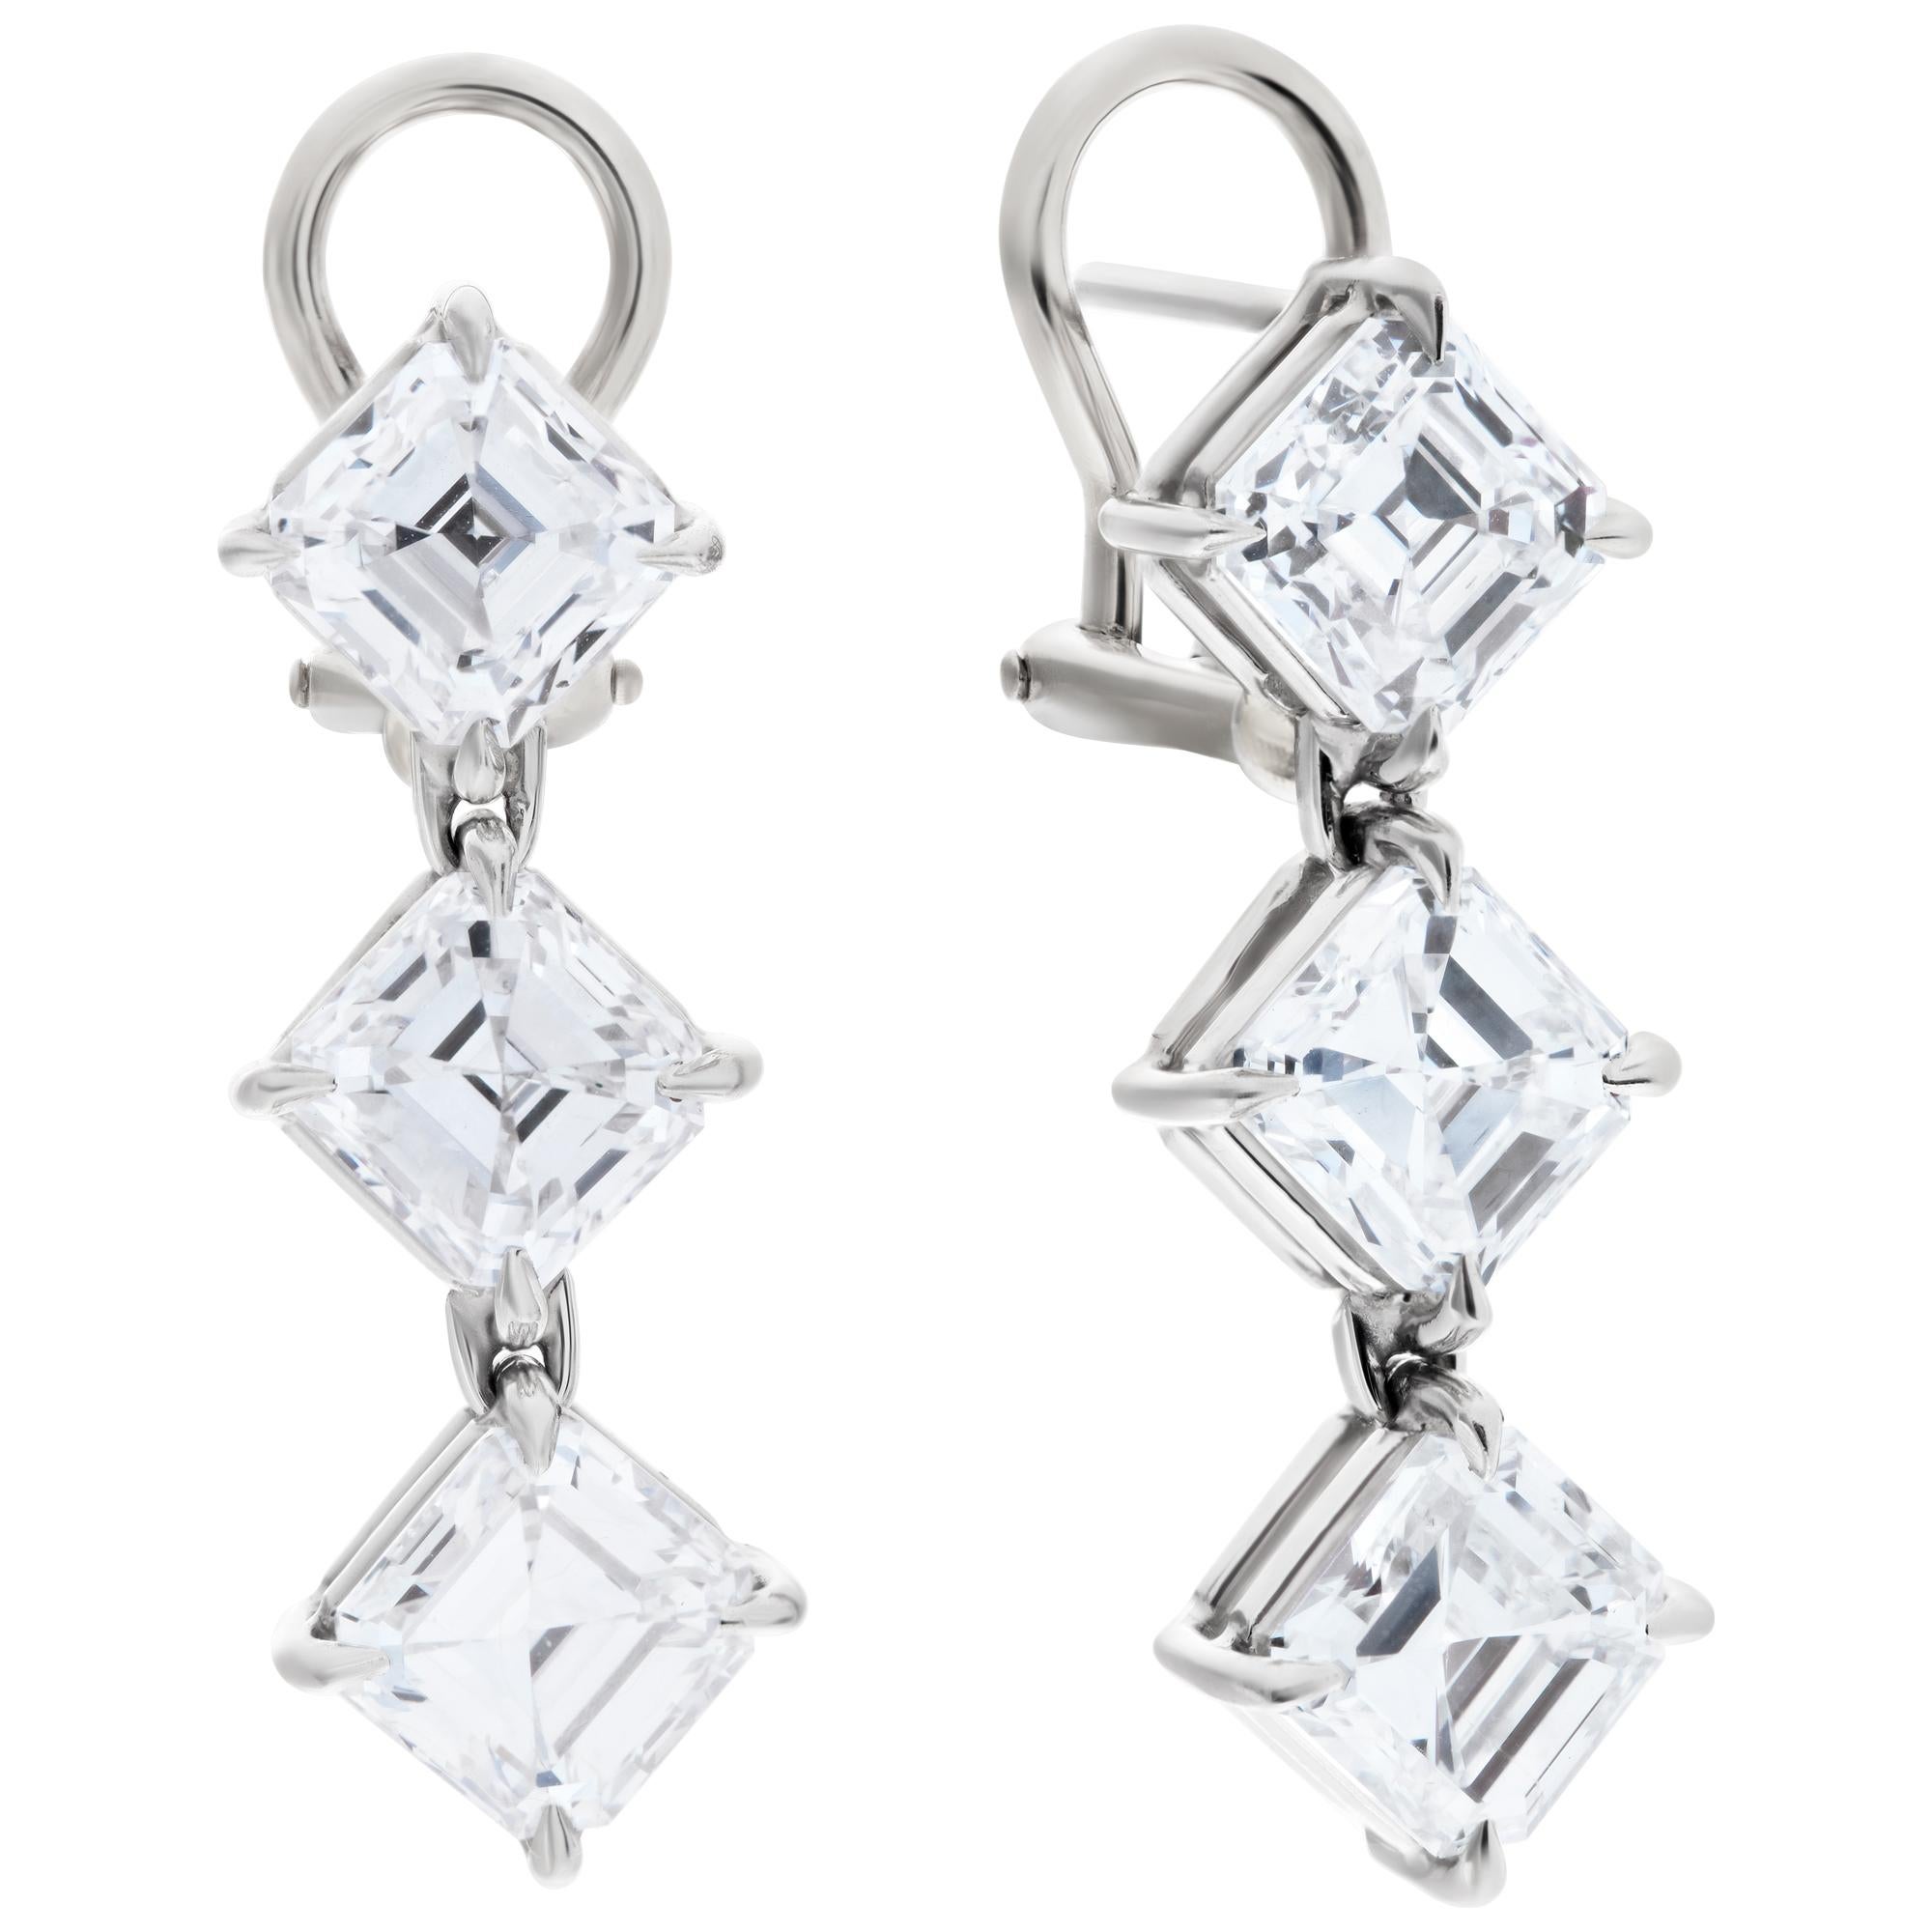 Dangling Stud Earrings, All GIA Certified, 6 Asscher Cut Diamonds Totaling 6.02 In Excellent Condition For Sale In Surfside, FL